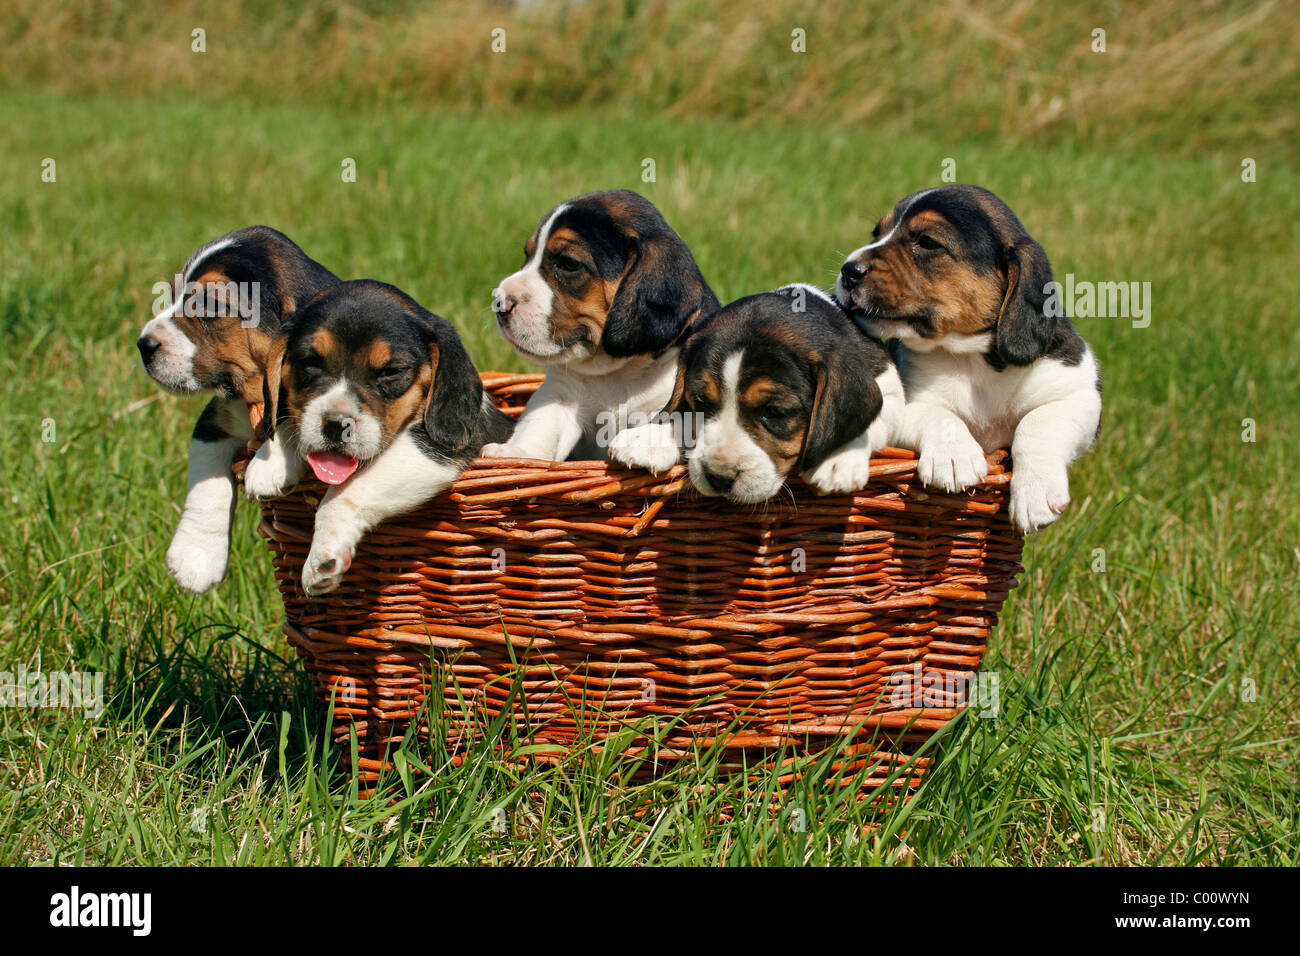 Group Of Beagles High Resolution Stock Photography and Images - Alamy